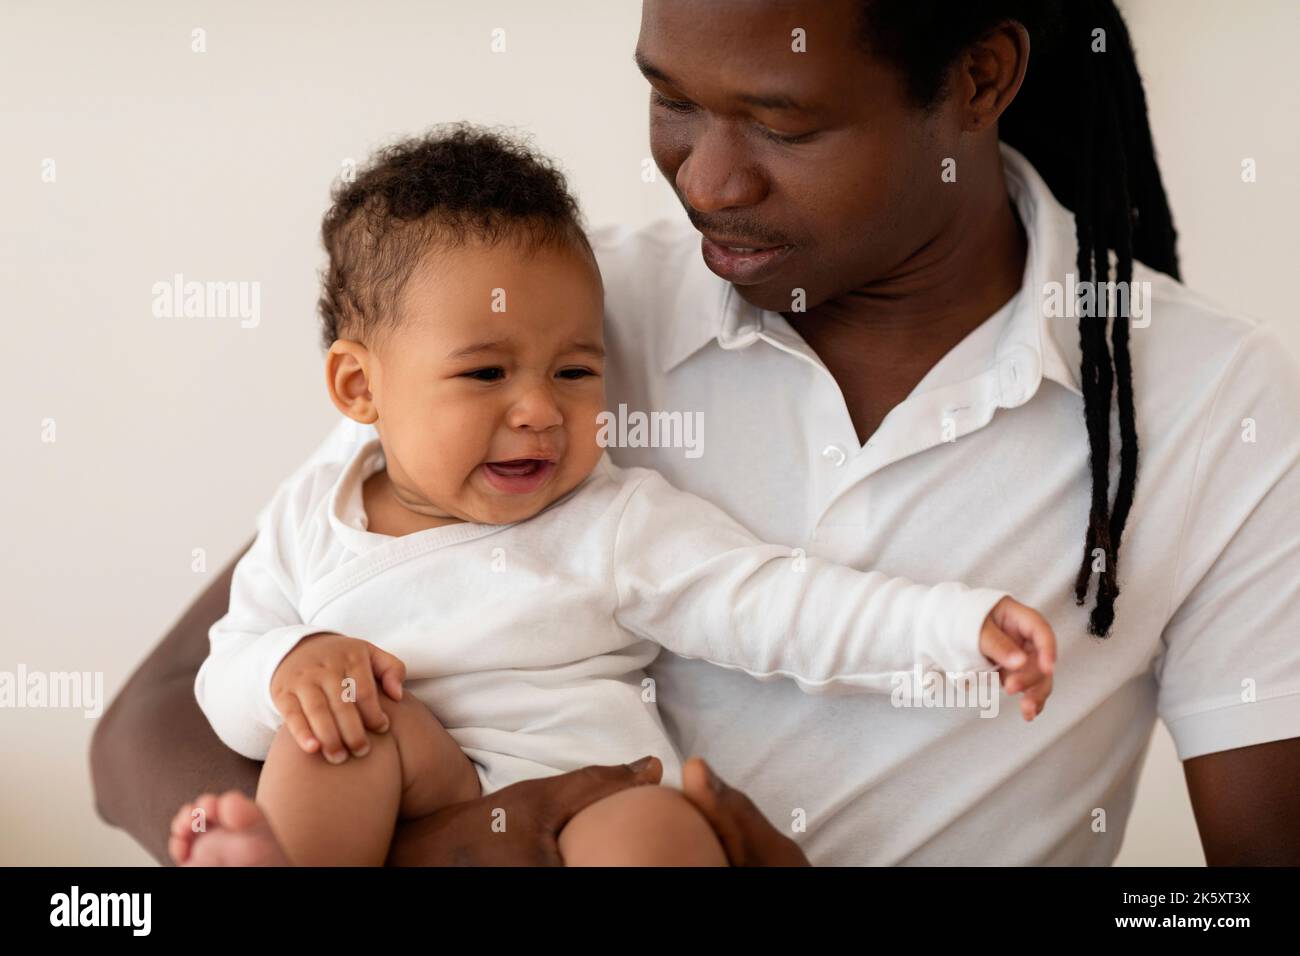 Portrait of Little Black Baby Crying in Father's Arms Stockfoto